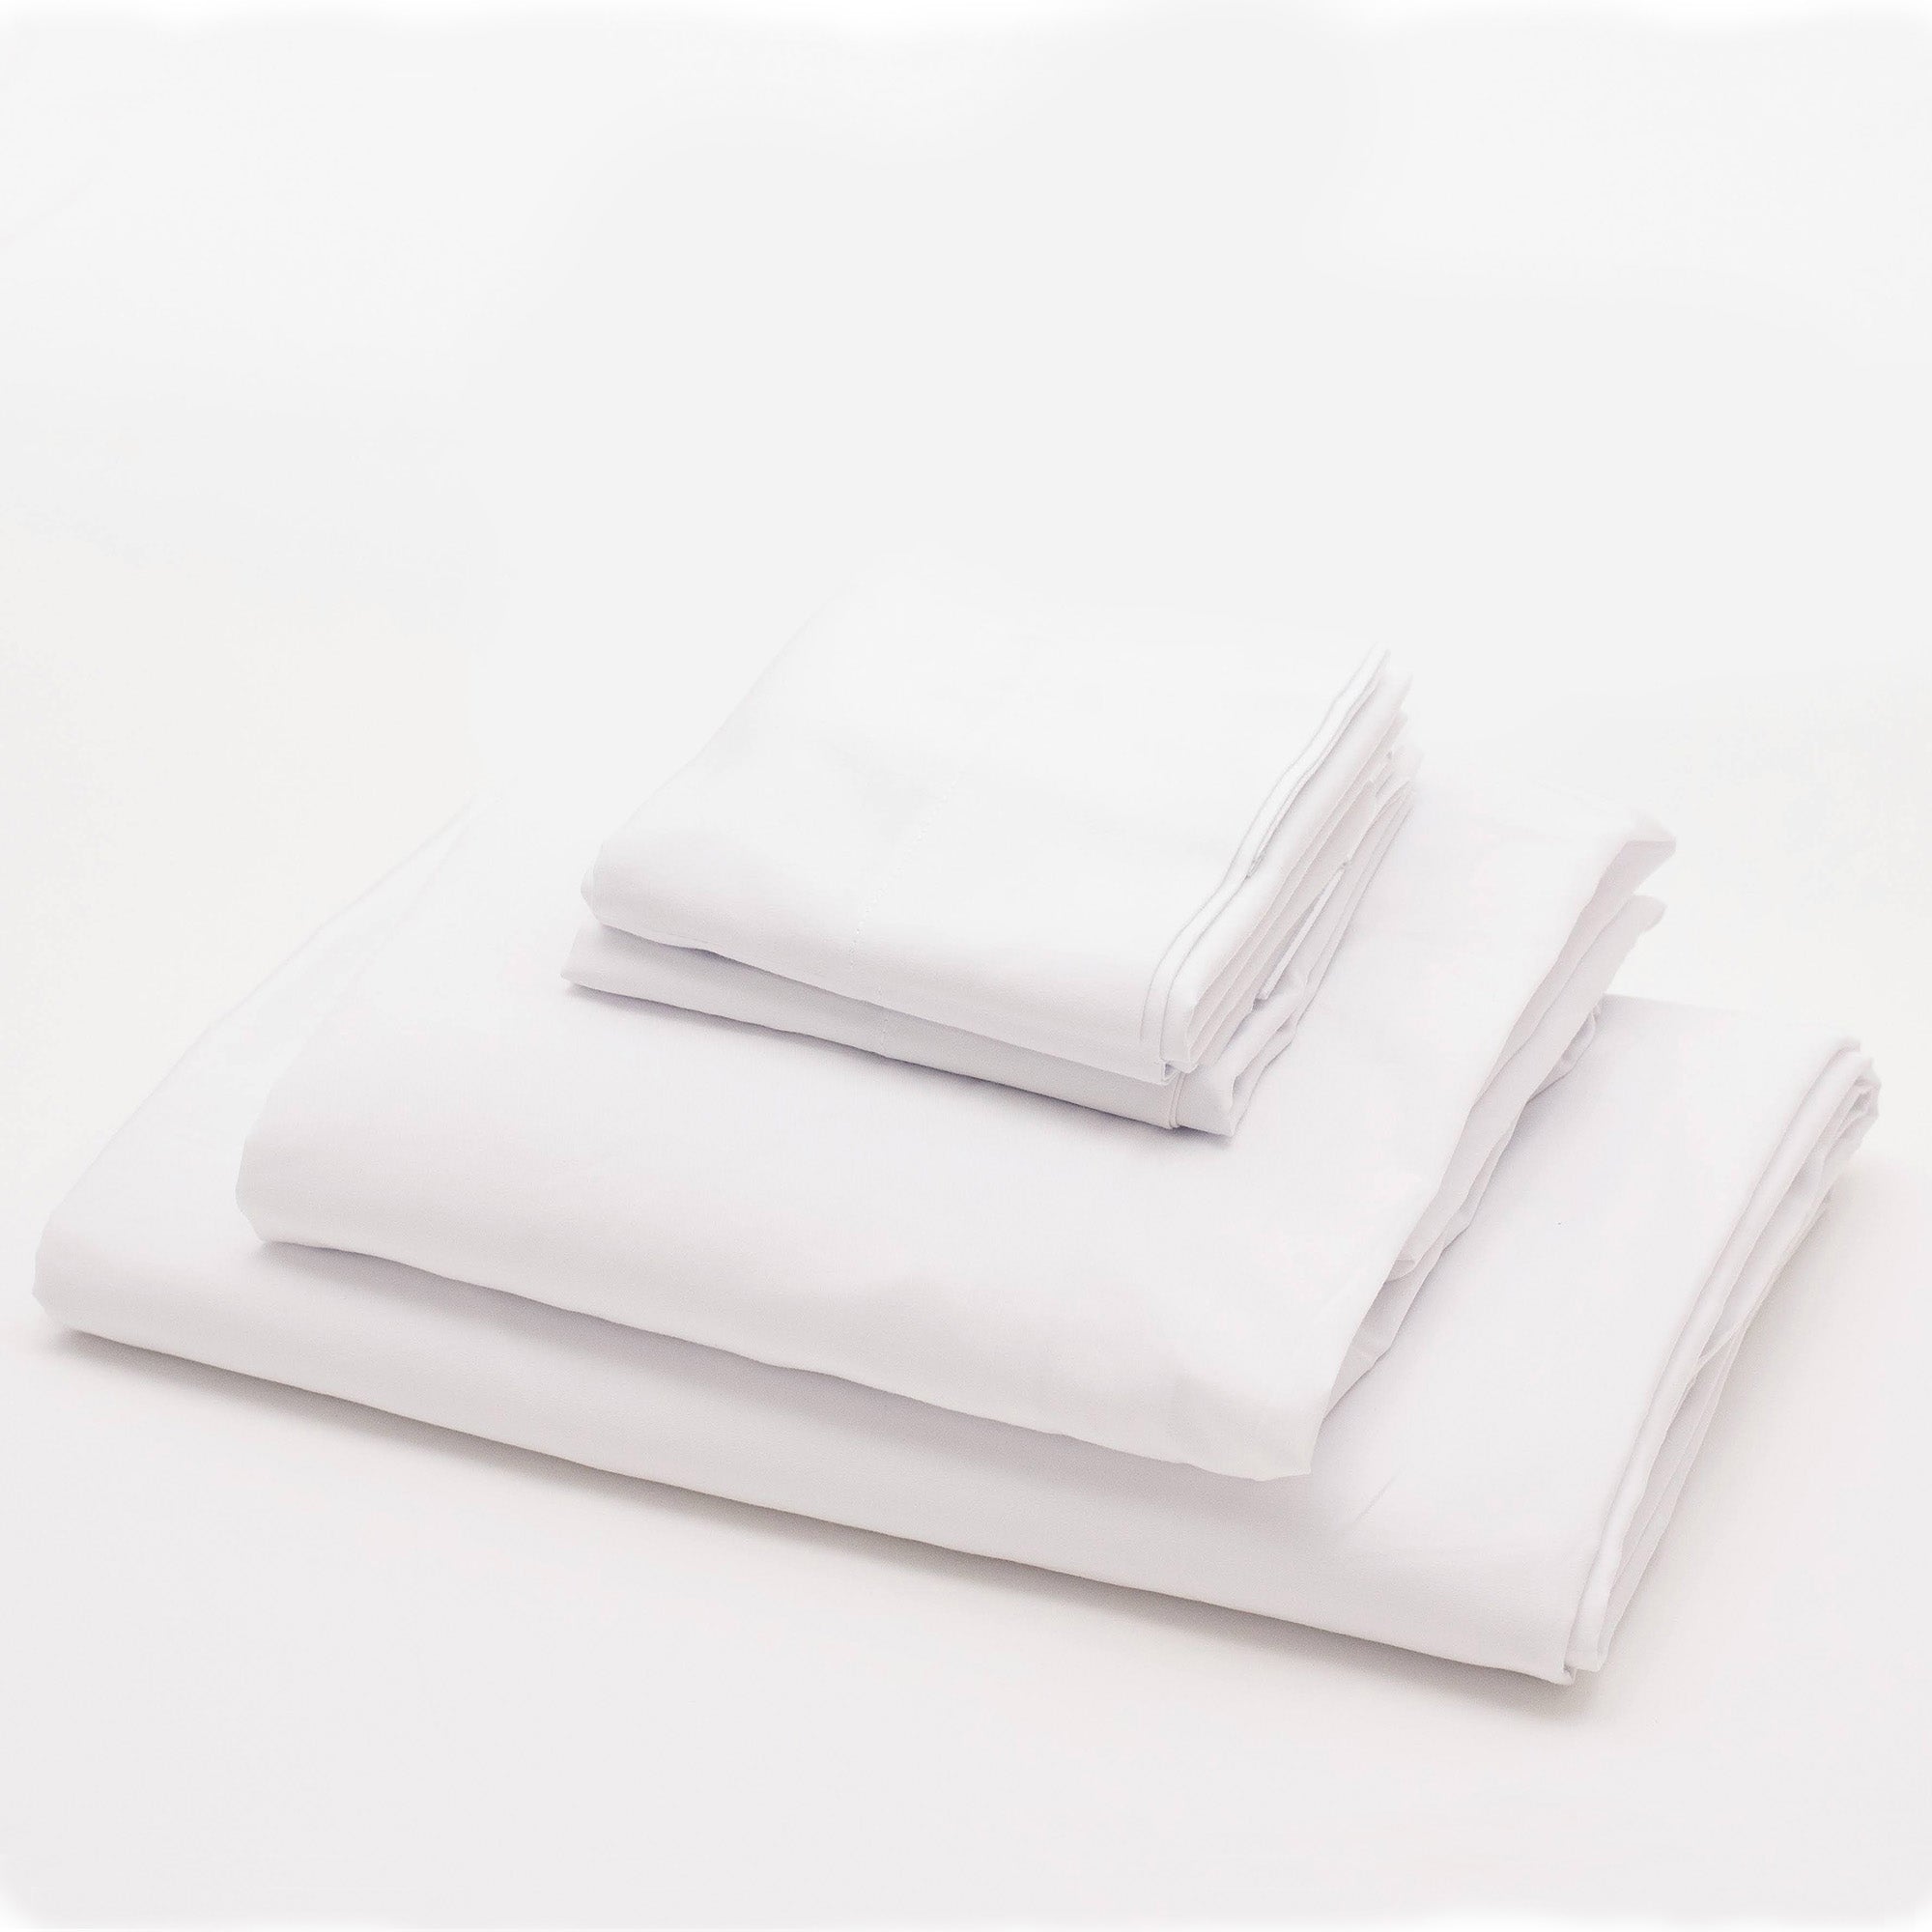 What is 100% Cotton and is it the Best Choice for Sheets?